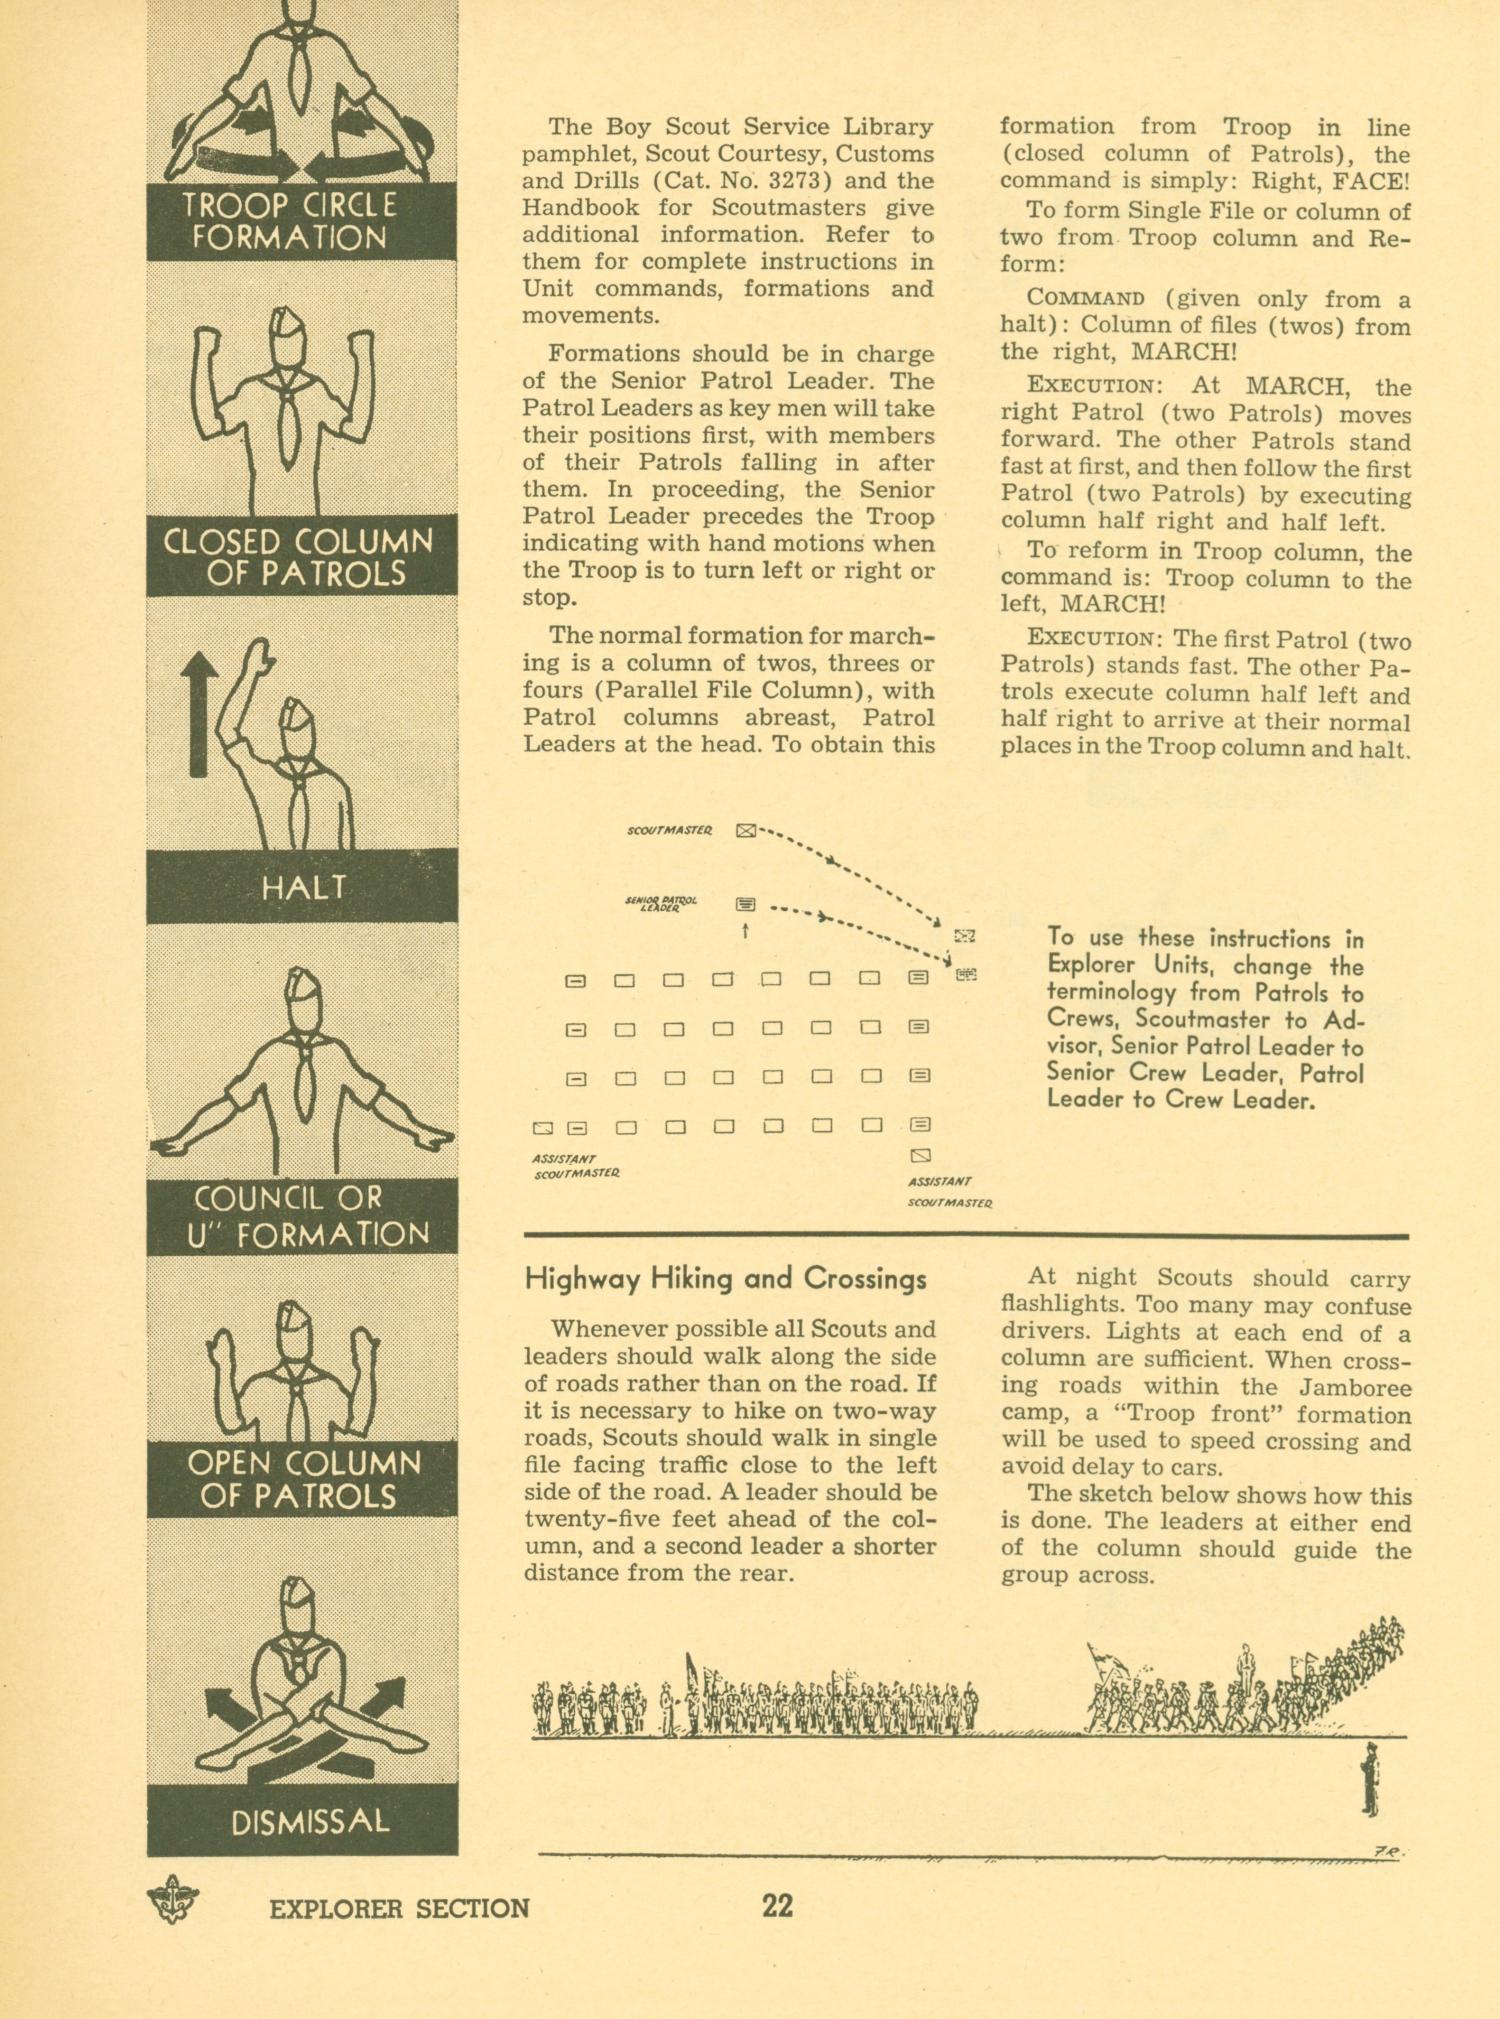 Scouting, Volume 41, Number 1, January 1953
                                                
                                                    22
                                                